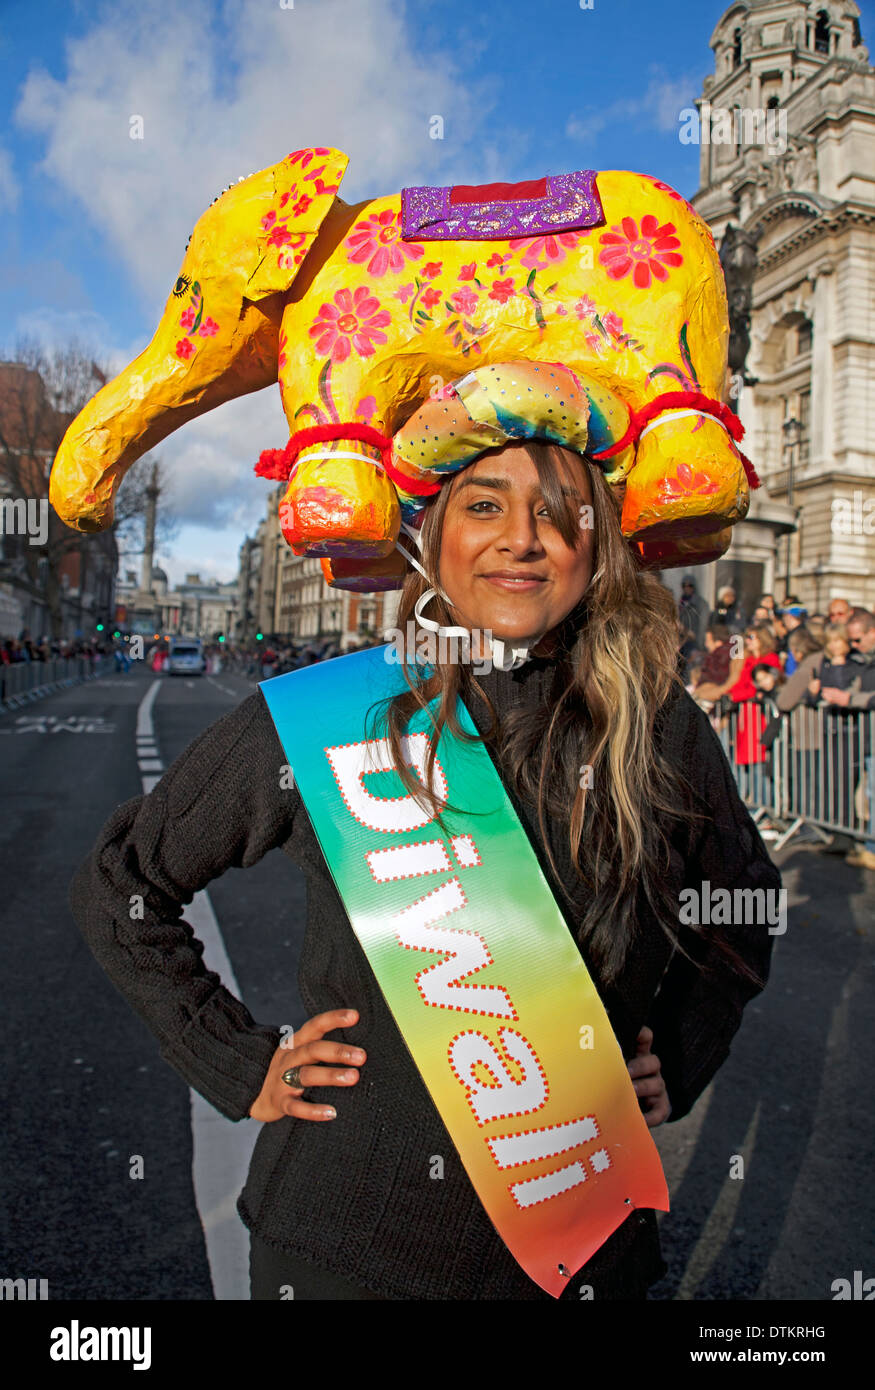 Female participant wearing a 'Diwali' sash at the 2013 New Year's Day Parade Stock Photo